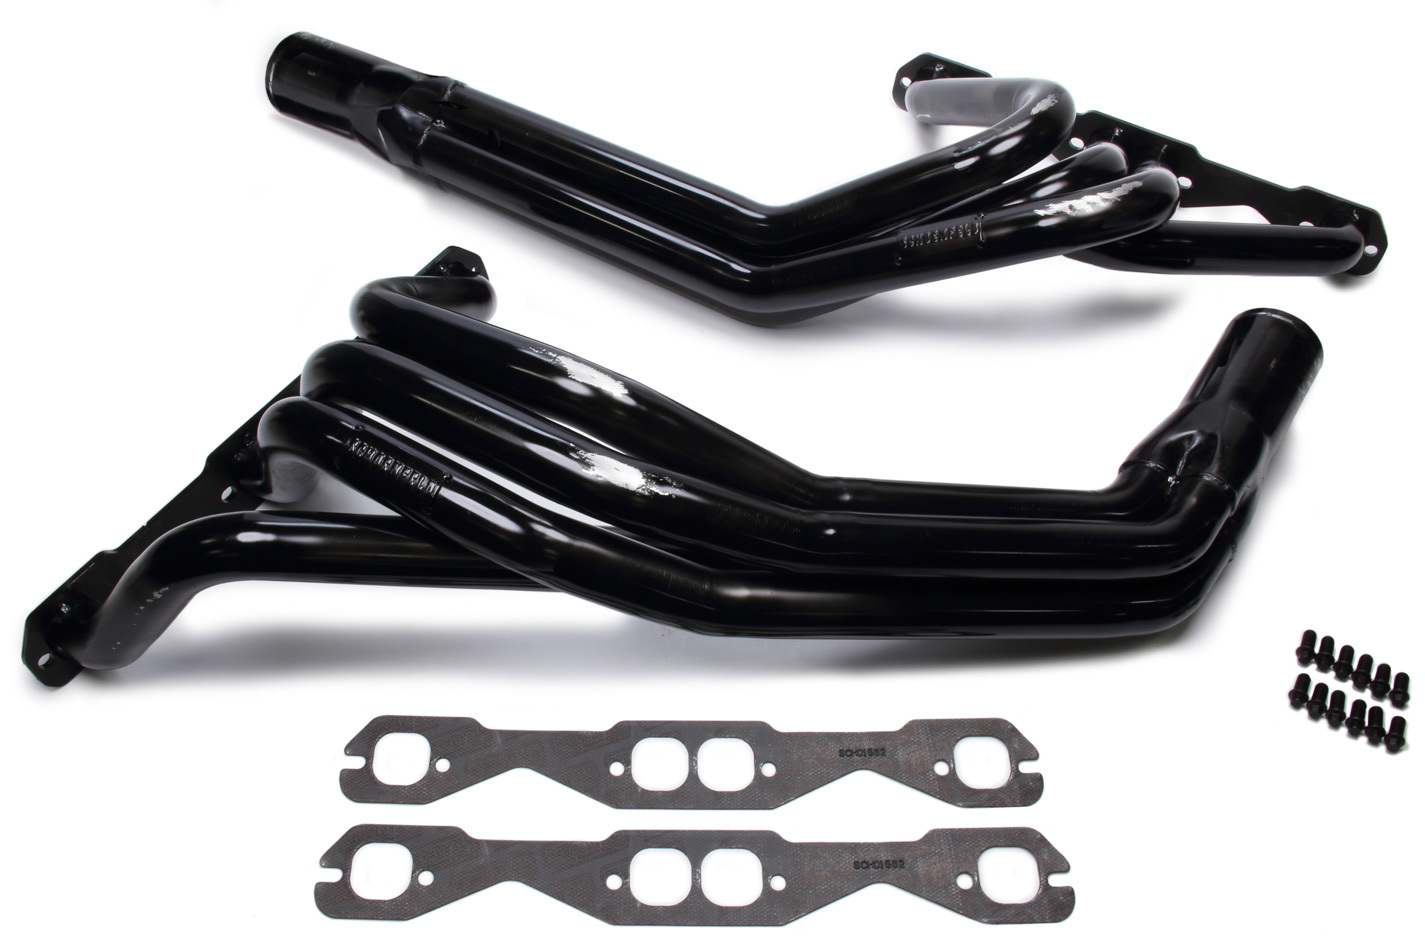 Schoenfeld Headers 1155LCM2 - Headers, Dirt Late Model, 1-5/8 in Primary, 3 in Collector, Steel, Black Paint, Small Block Chevy, Kit